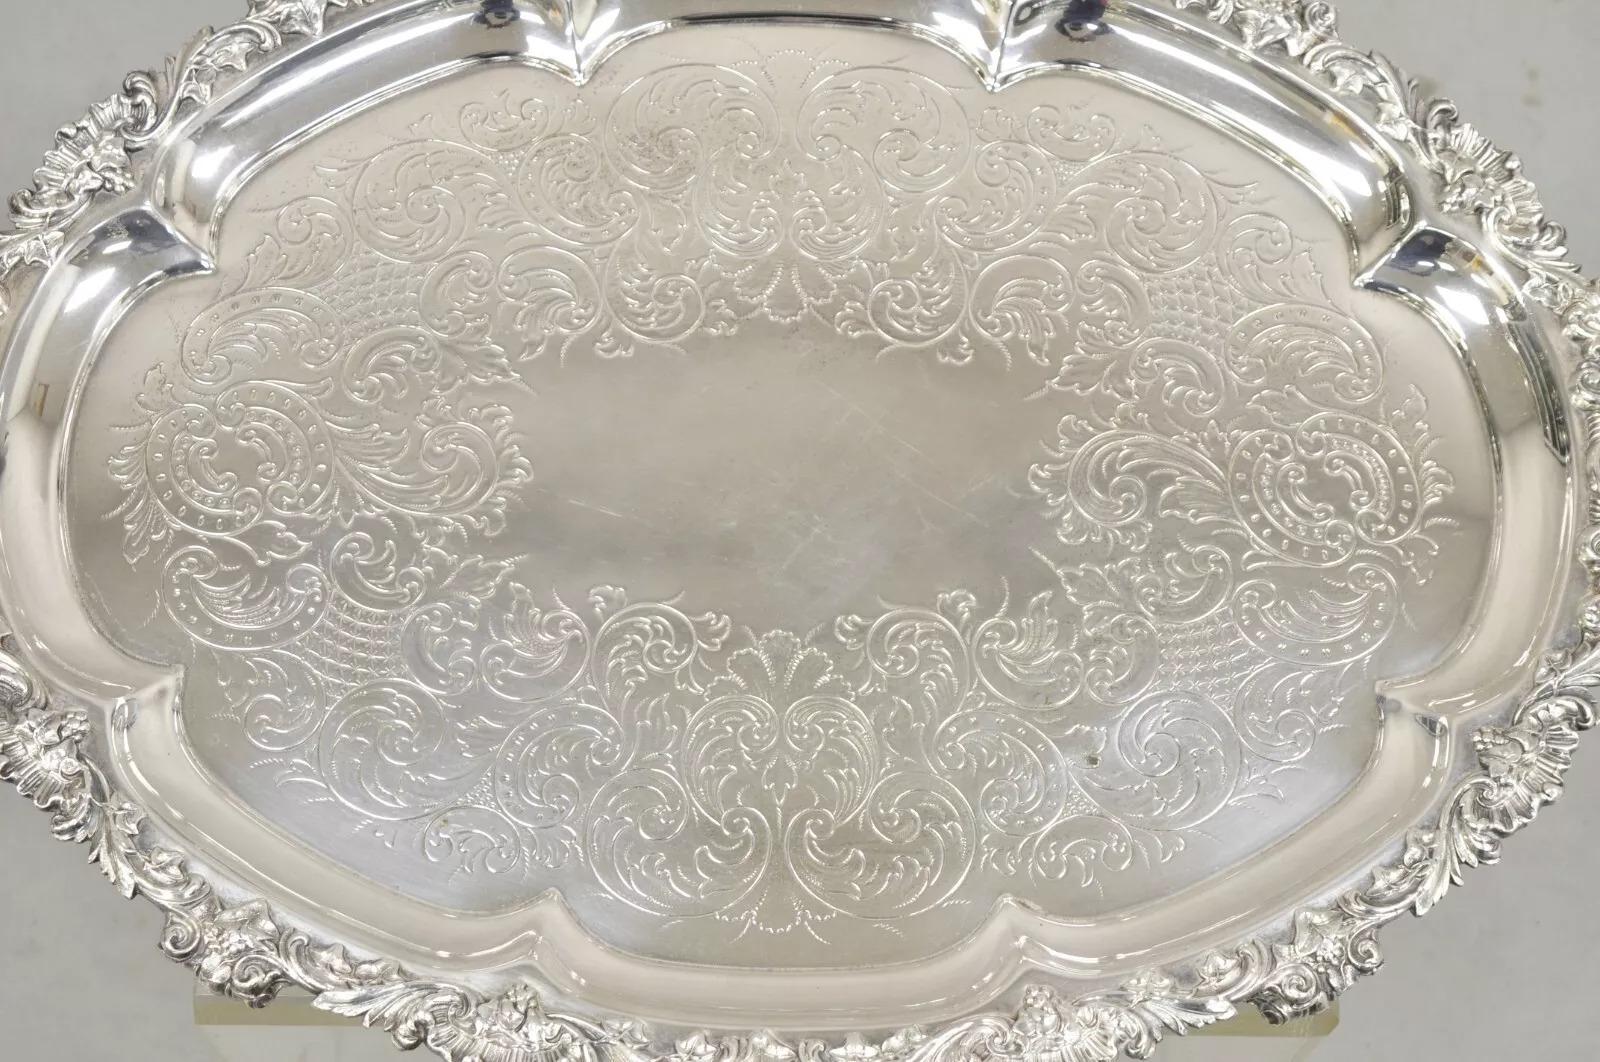 20th Century Antique Victorian English Sheffield Ornate Oval Serving Platter Tray For Sale